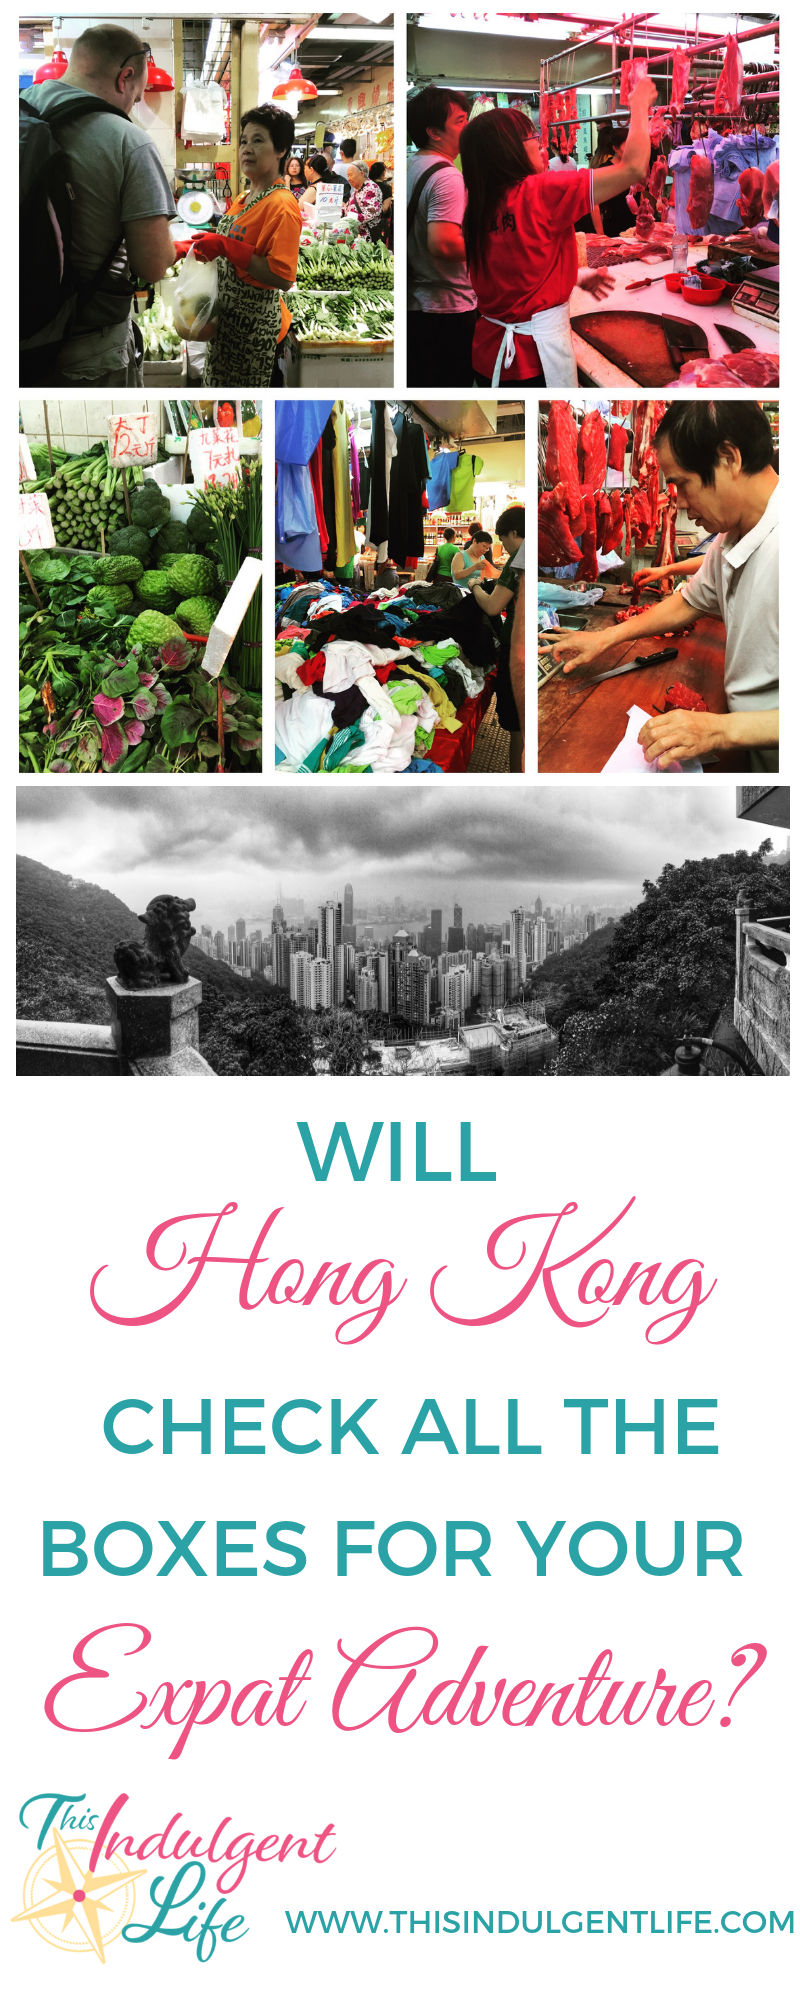 Will Hong Kong check all the boxes for your expat adventure? | This Indulgent Life | I used these 6 questions to help guide us to choosing Hong Kong as our new home overseas. But what country is right for you and your family? Download the free workbook and answer the questions to help you decide what's best for you! | #expatlife #expatliving #hongkongexpat #overseasliving #familyadventure #familytravel #hongkongtravel #asiatravel